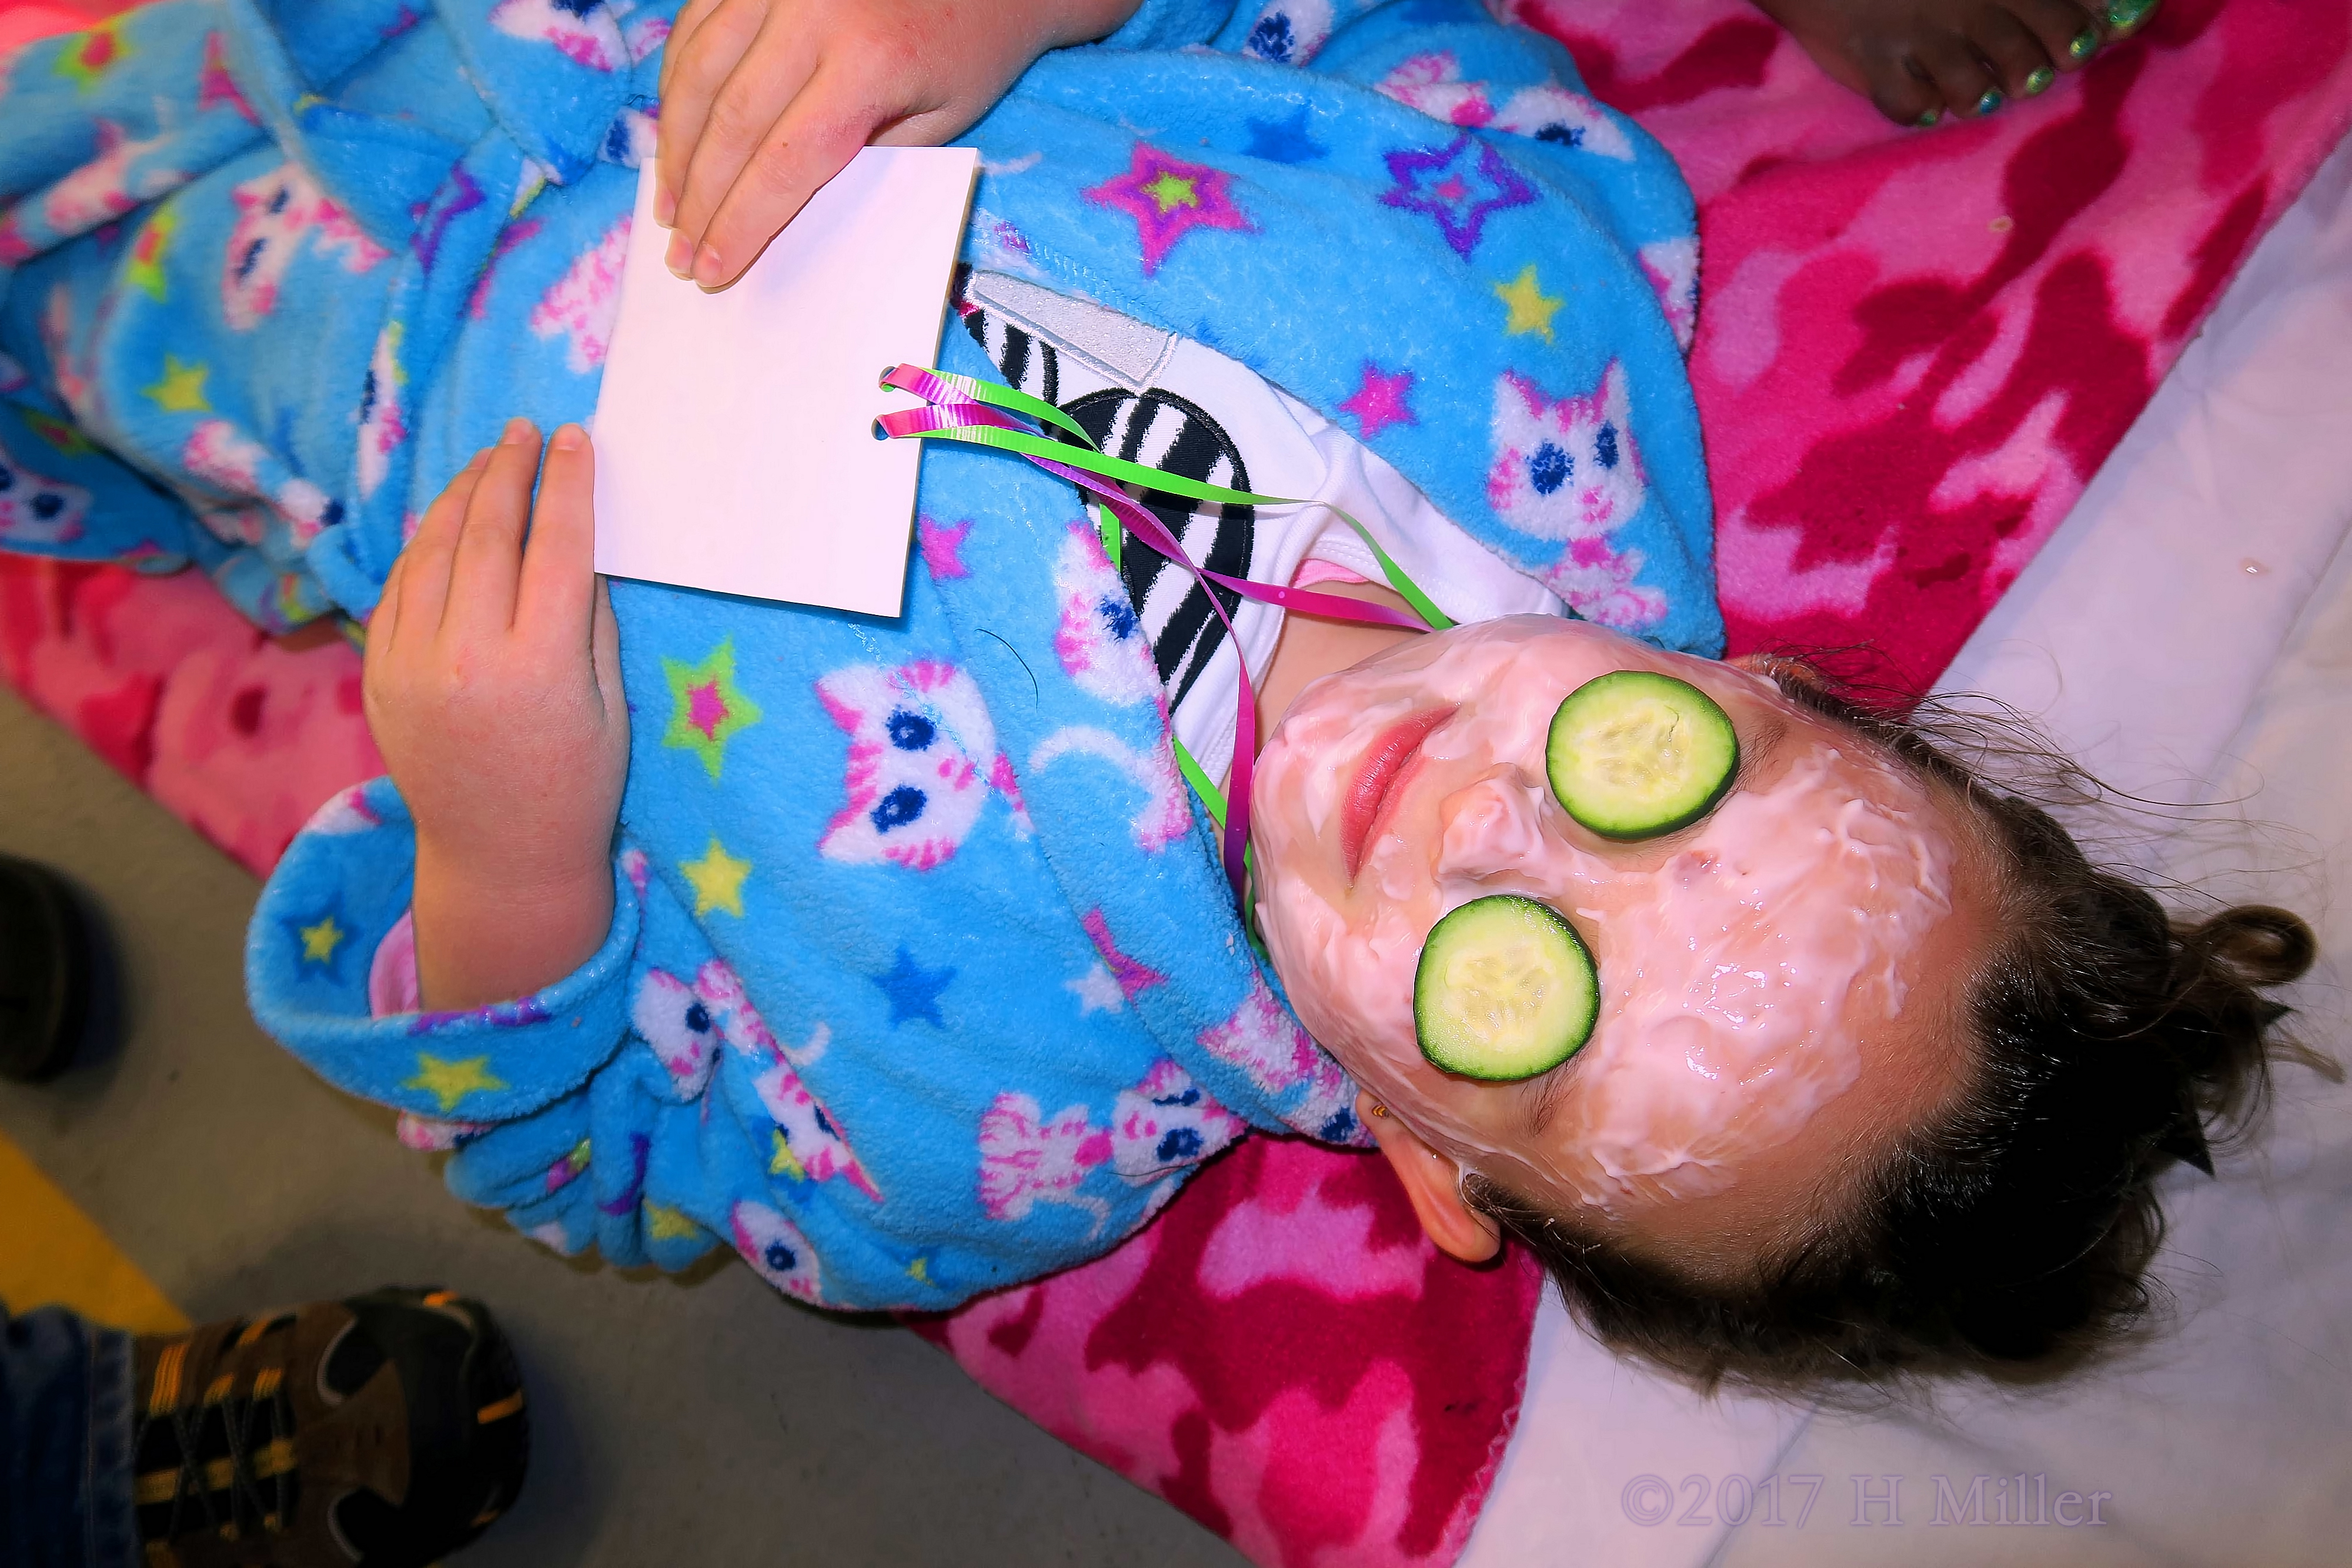 The Kids Facial Masque Is So Soothing And Fun 4